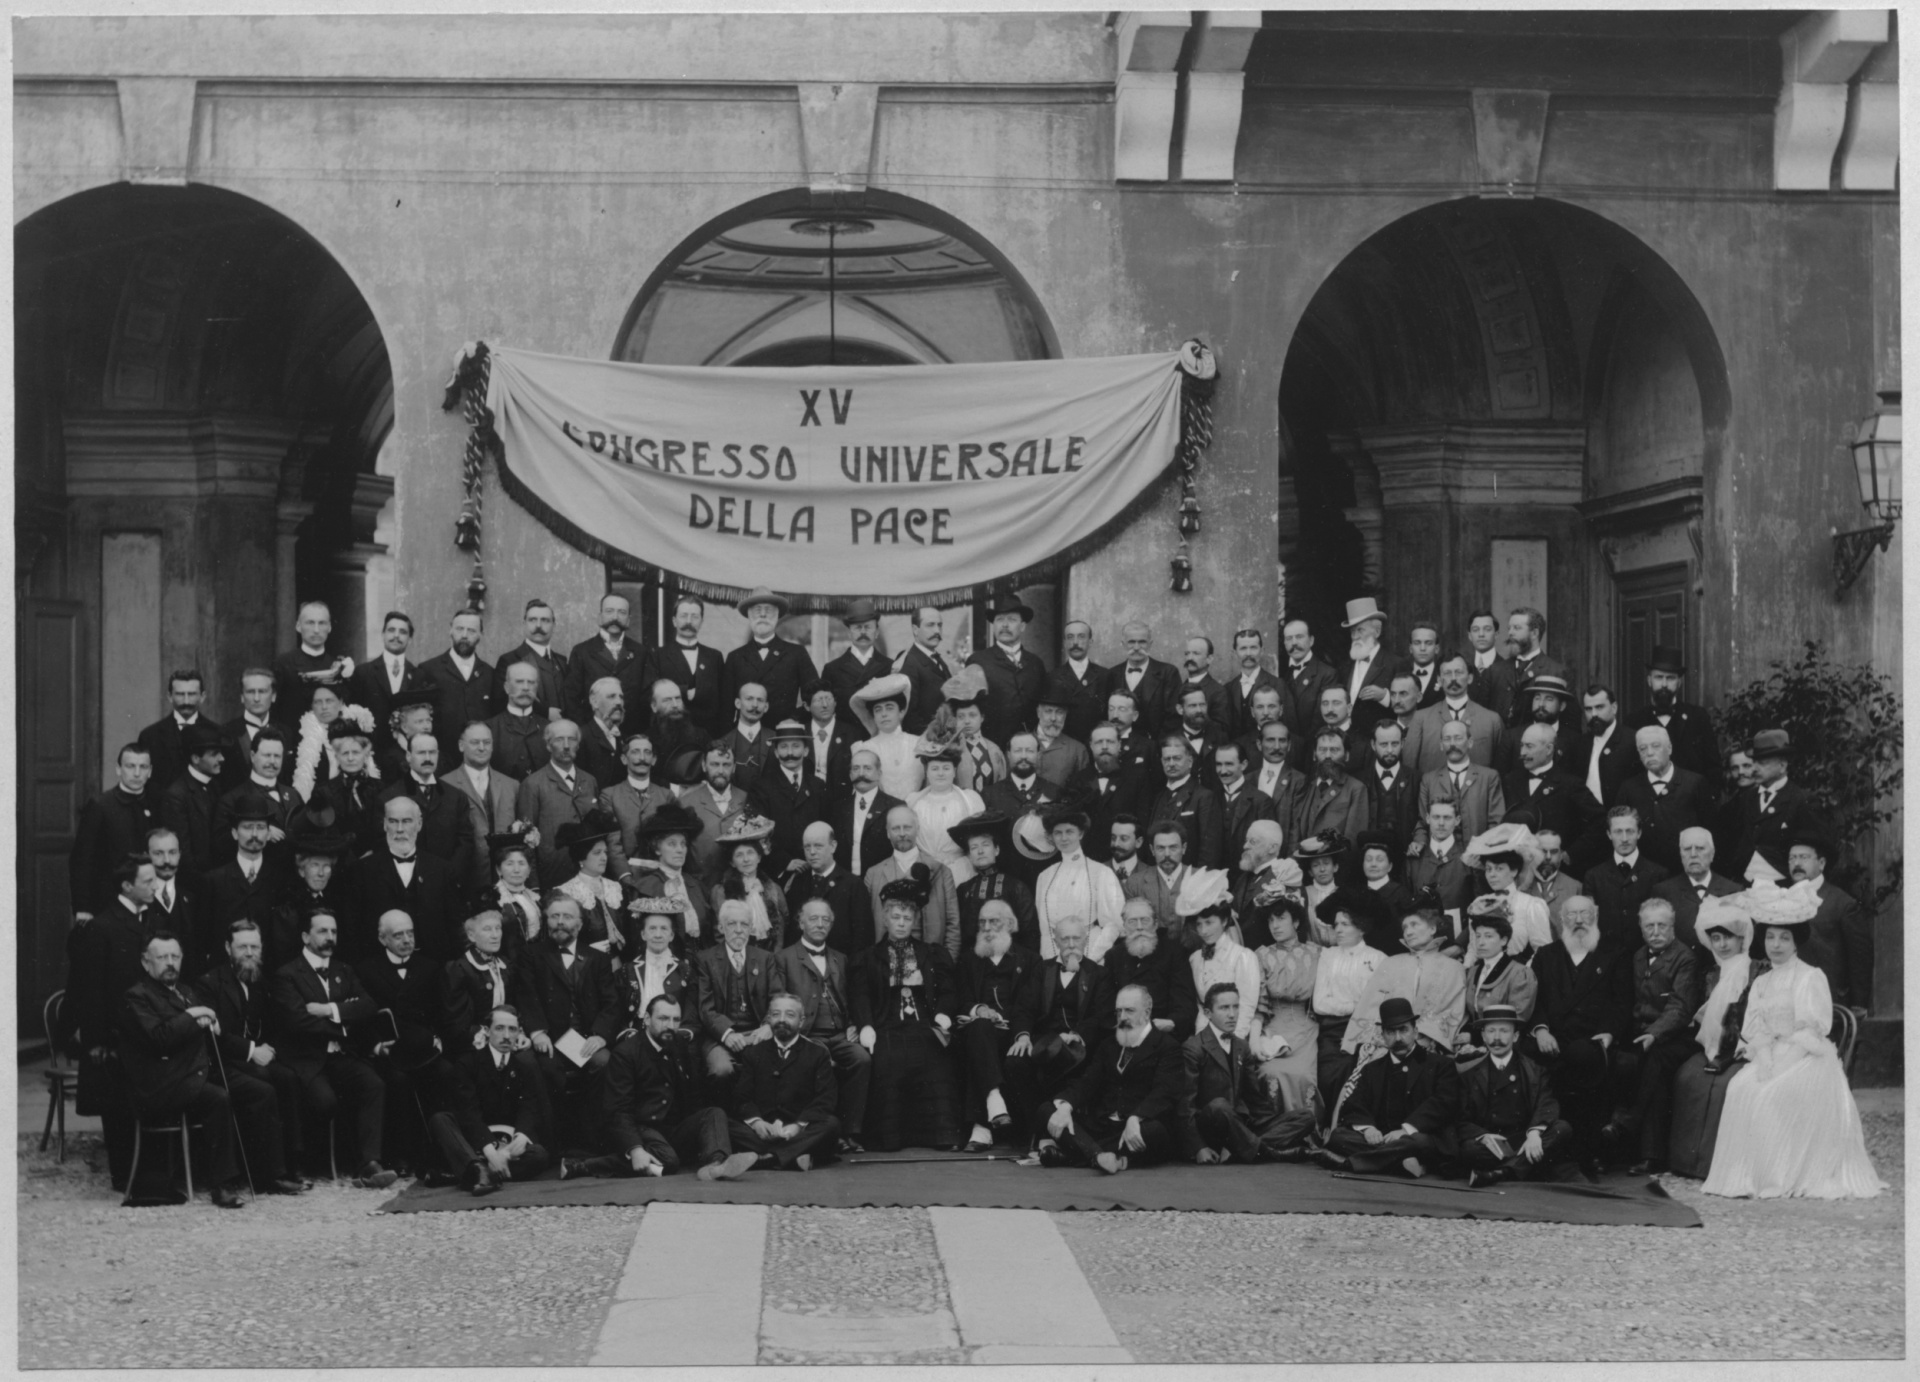 A group photo with around 80 persons. They are holding a banner written "XV Congresso Universale Della Pace"